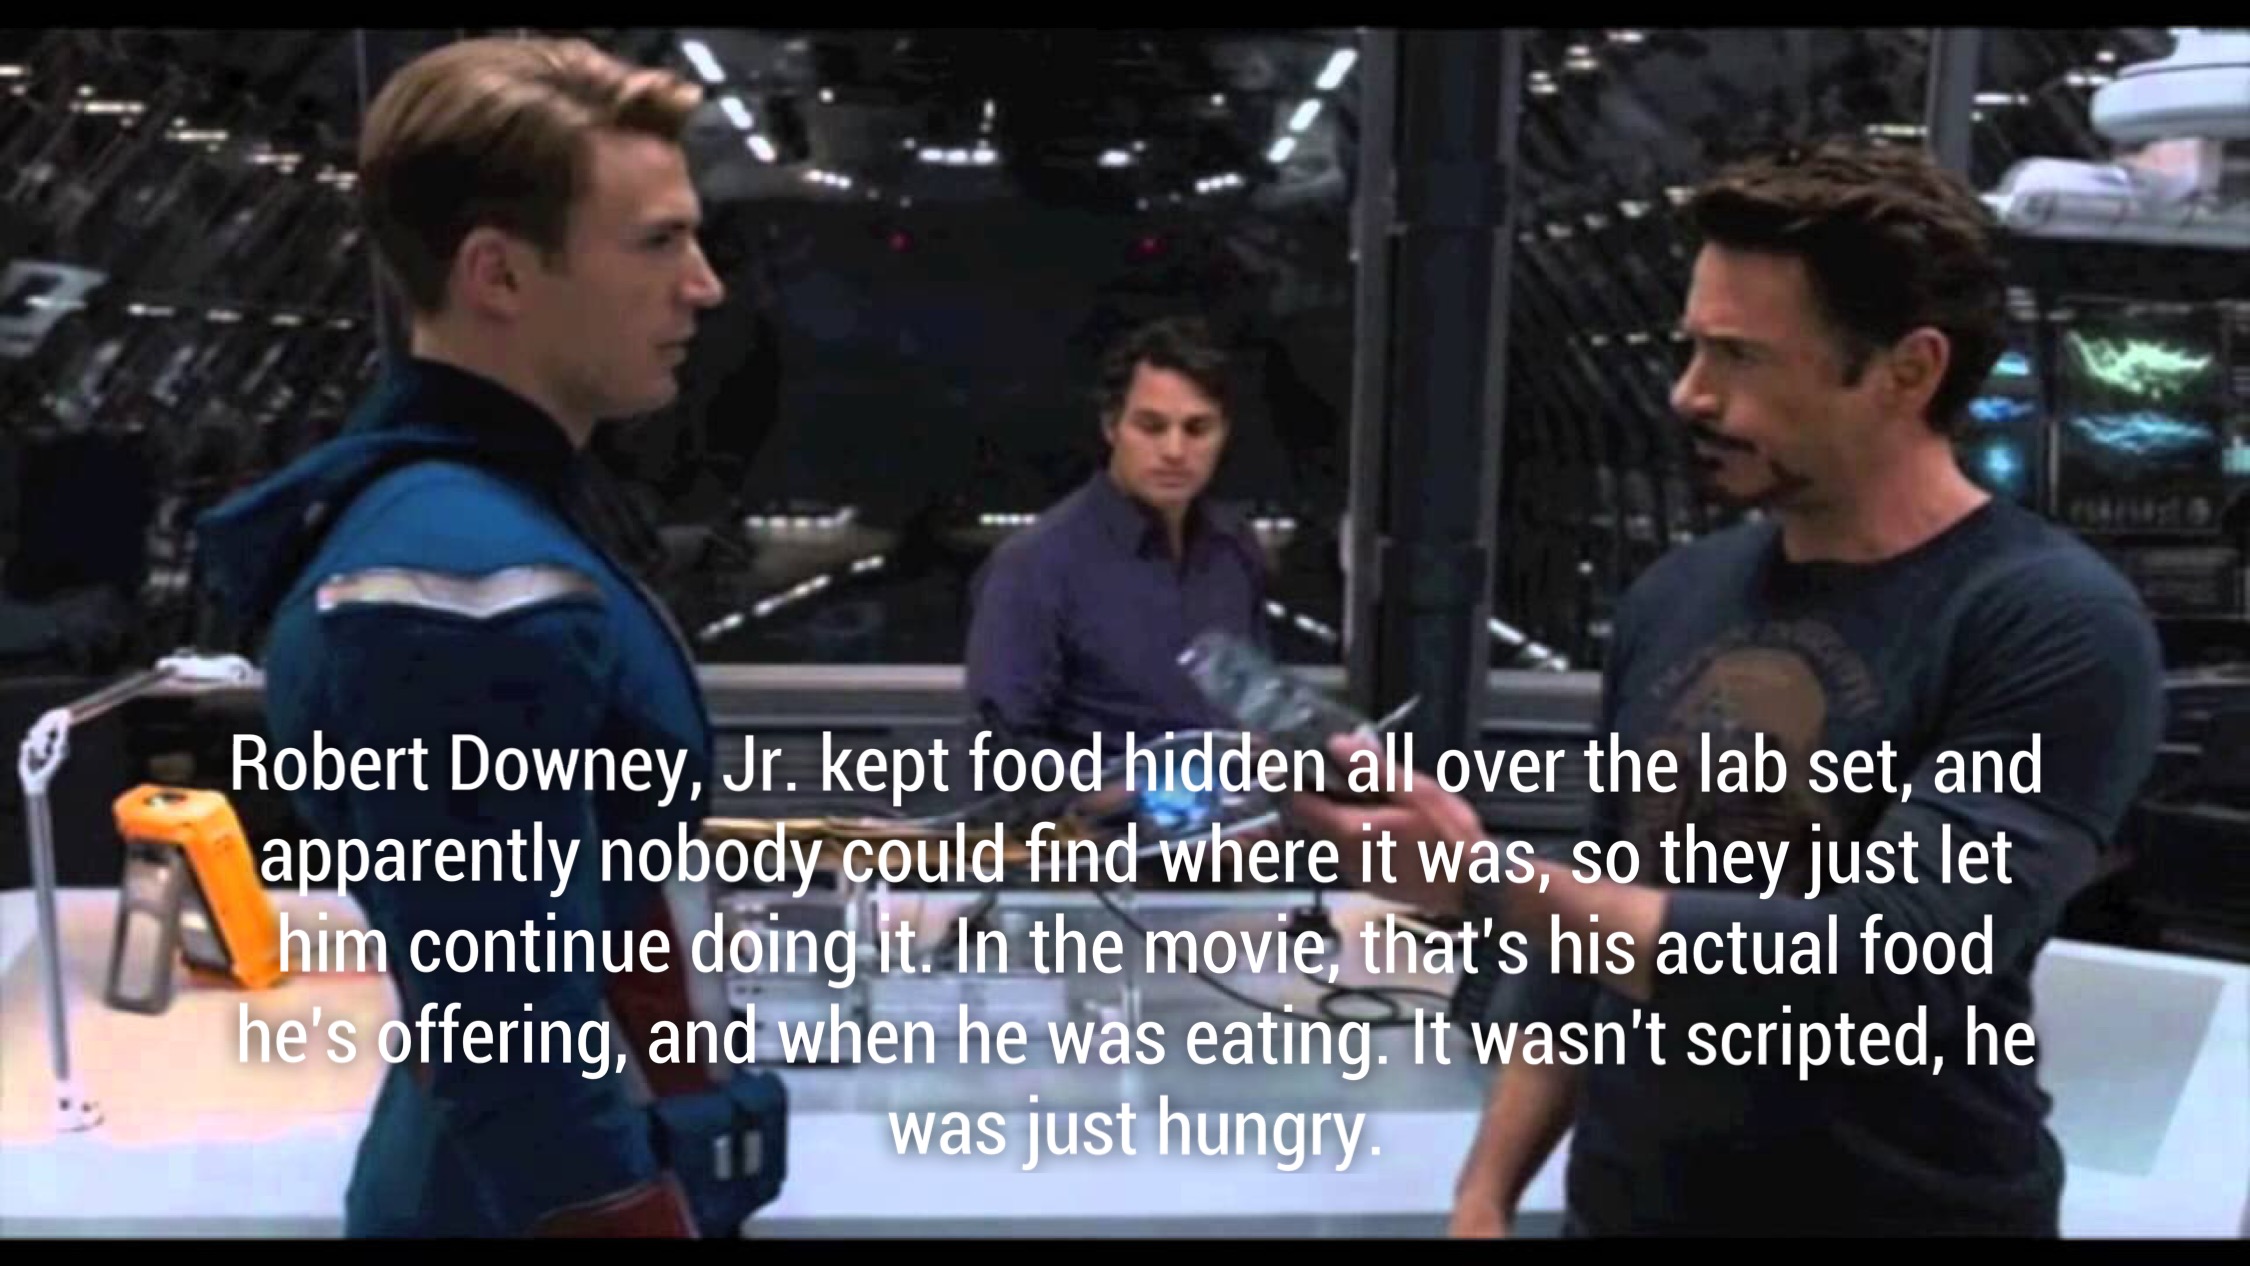 The Avengers - Robert Downey, Jr. kept food hidden all over the lab set, and apparently nobody could find where it was, so they just let him continue doing it. In the movie, that's his actual food he's offering, and when he was eating. It wasn't scripted,